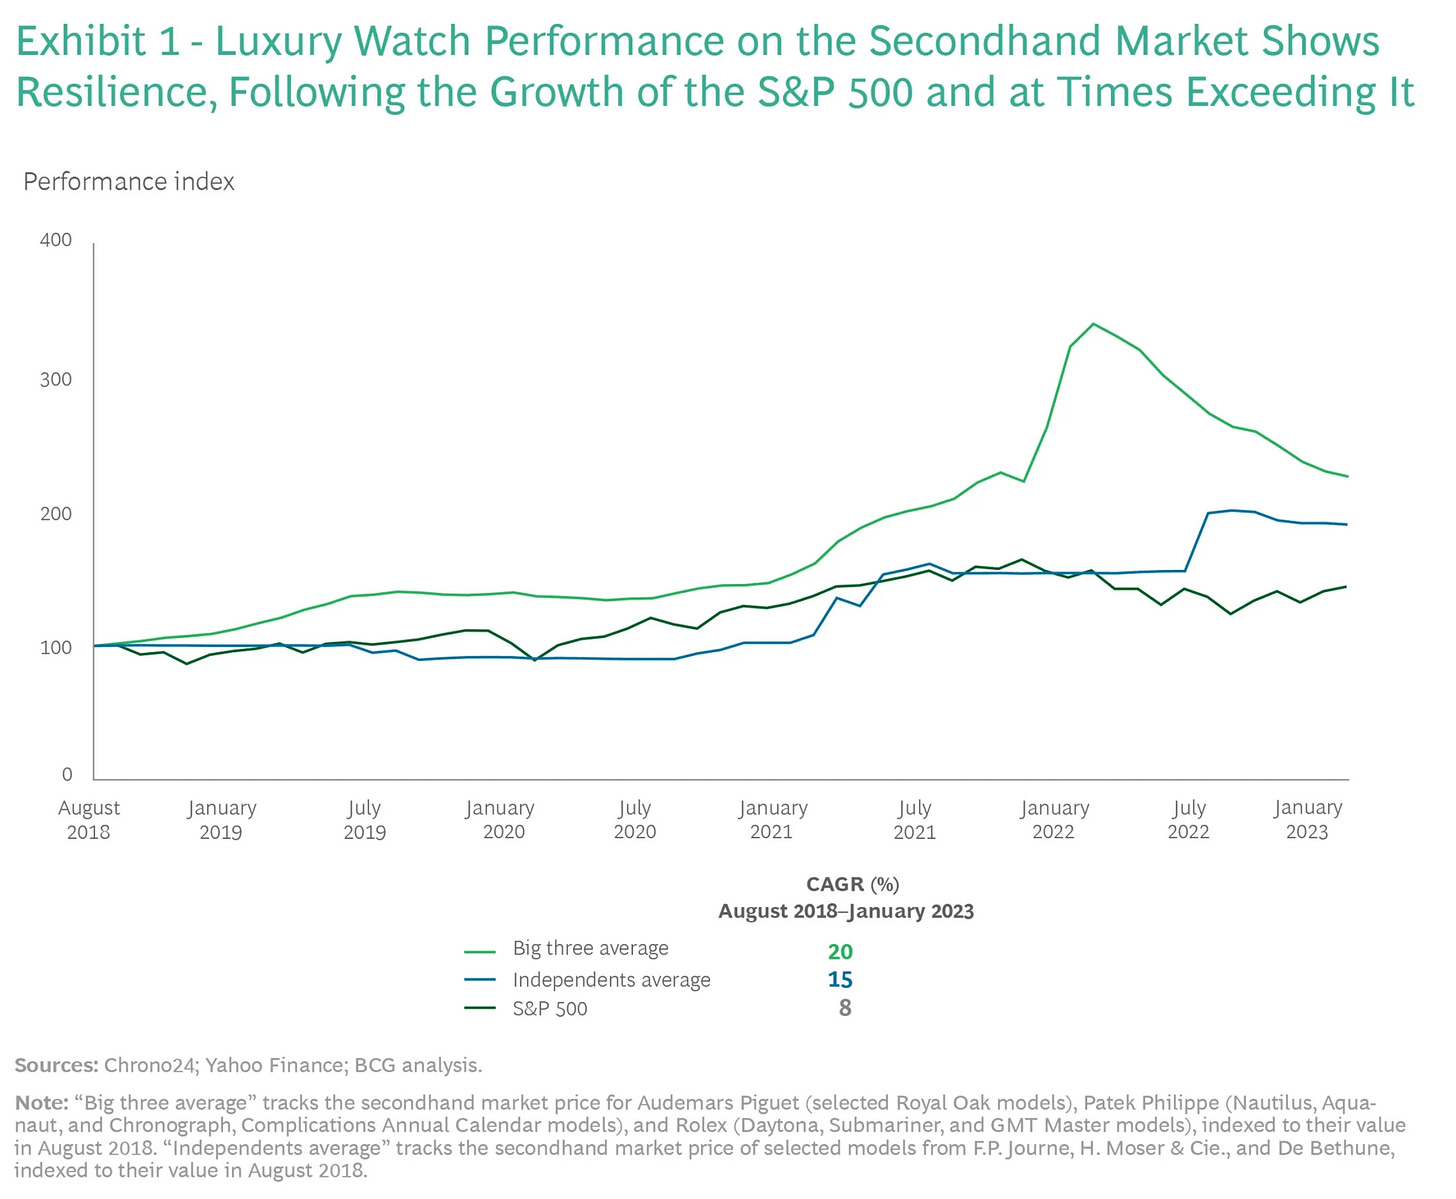 Luxury watch performance vs the S&P 500 over time